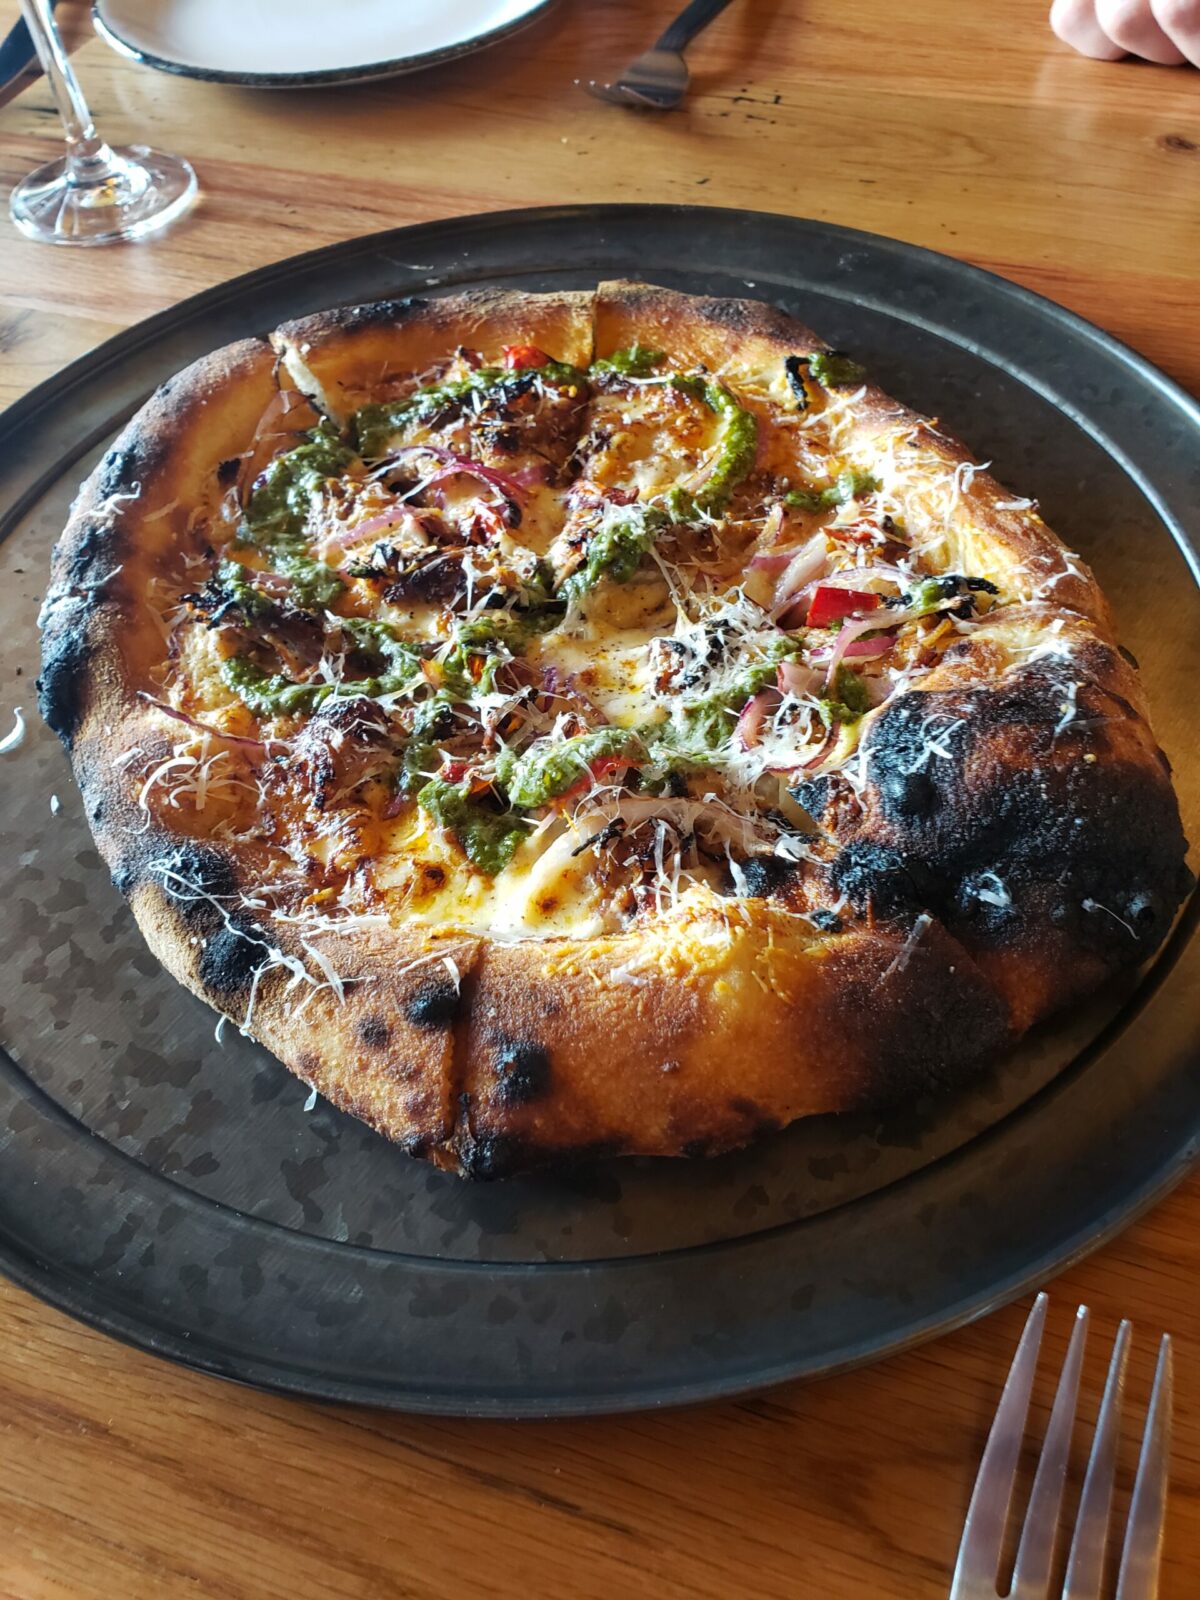 Smoked Pork Pizza at The Kitchen Table